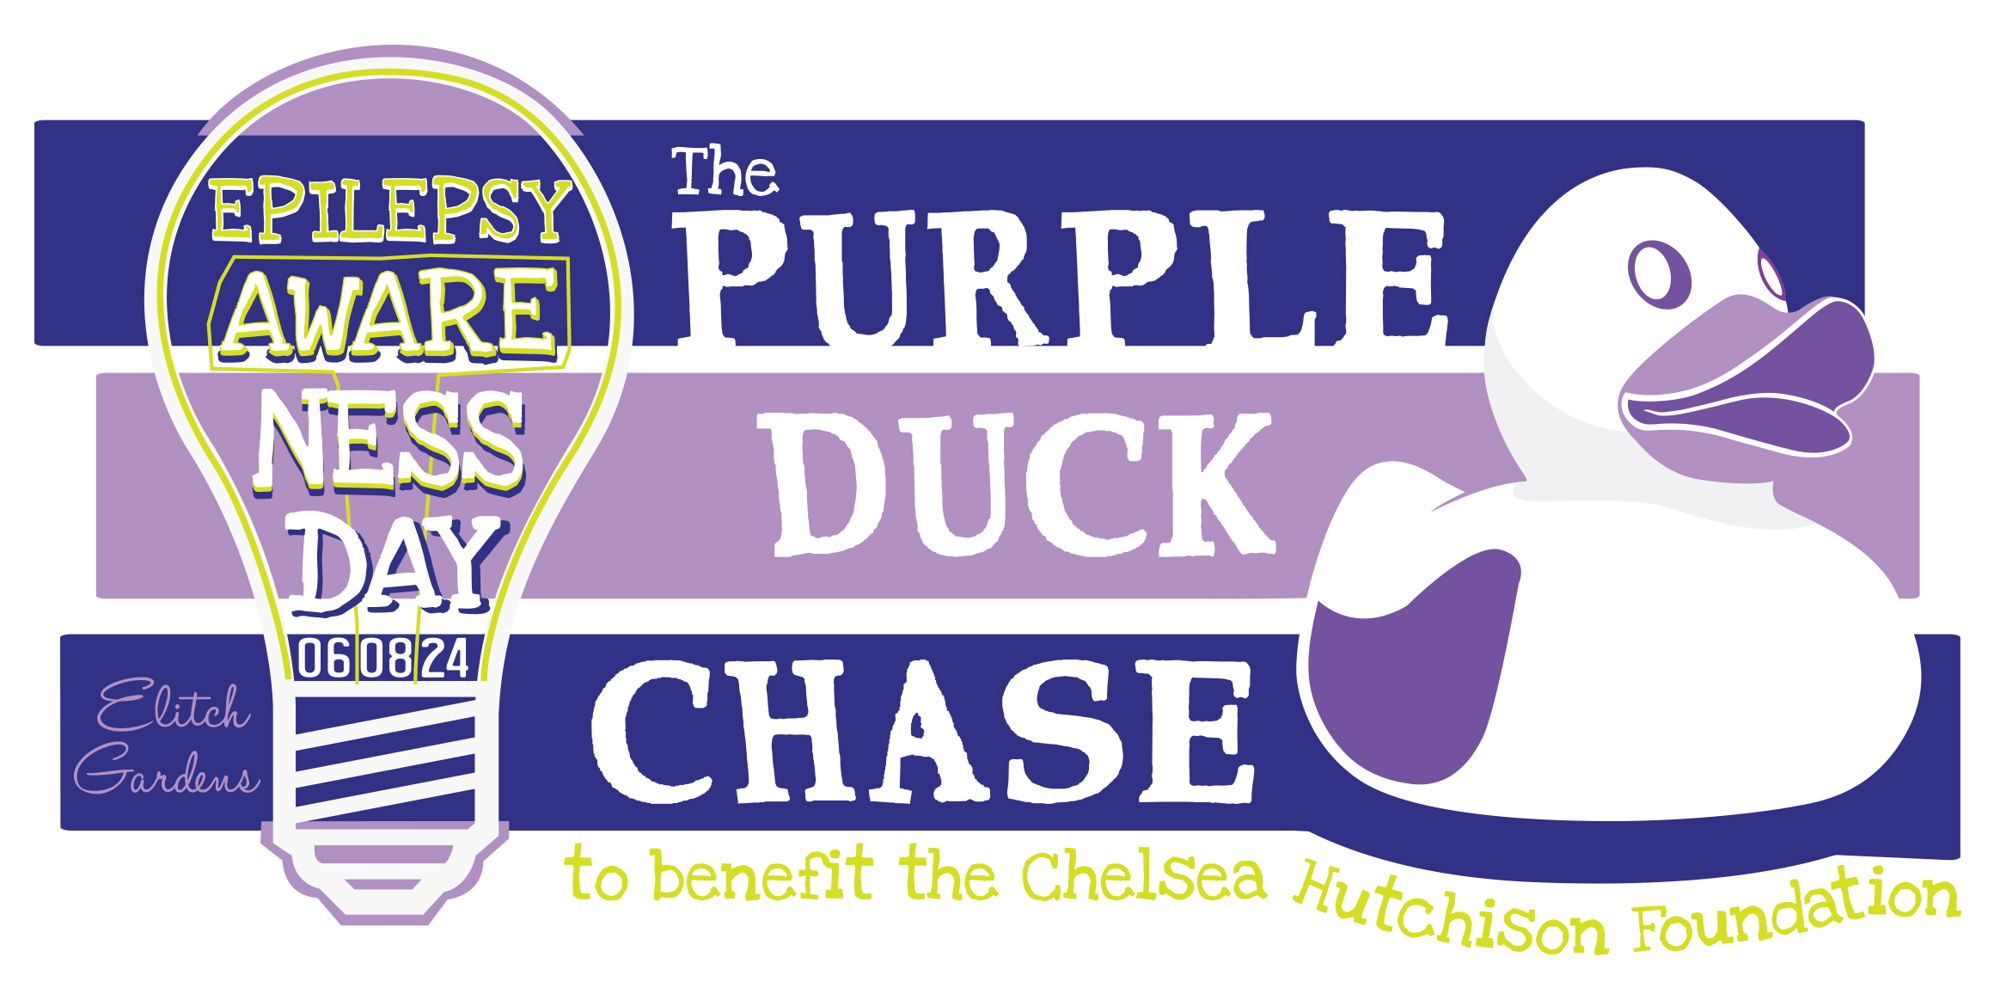 Epilepsy Awareness Day at Elitches and the  Purple Duck Chase promotional image